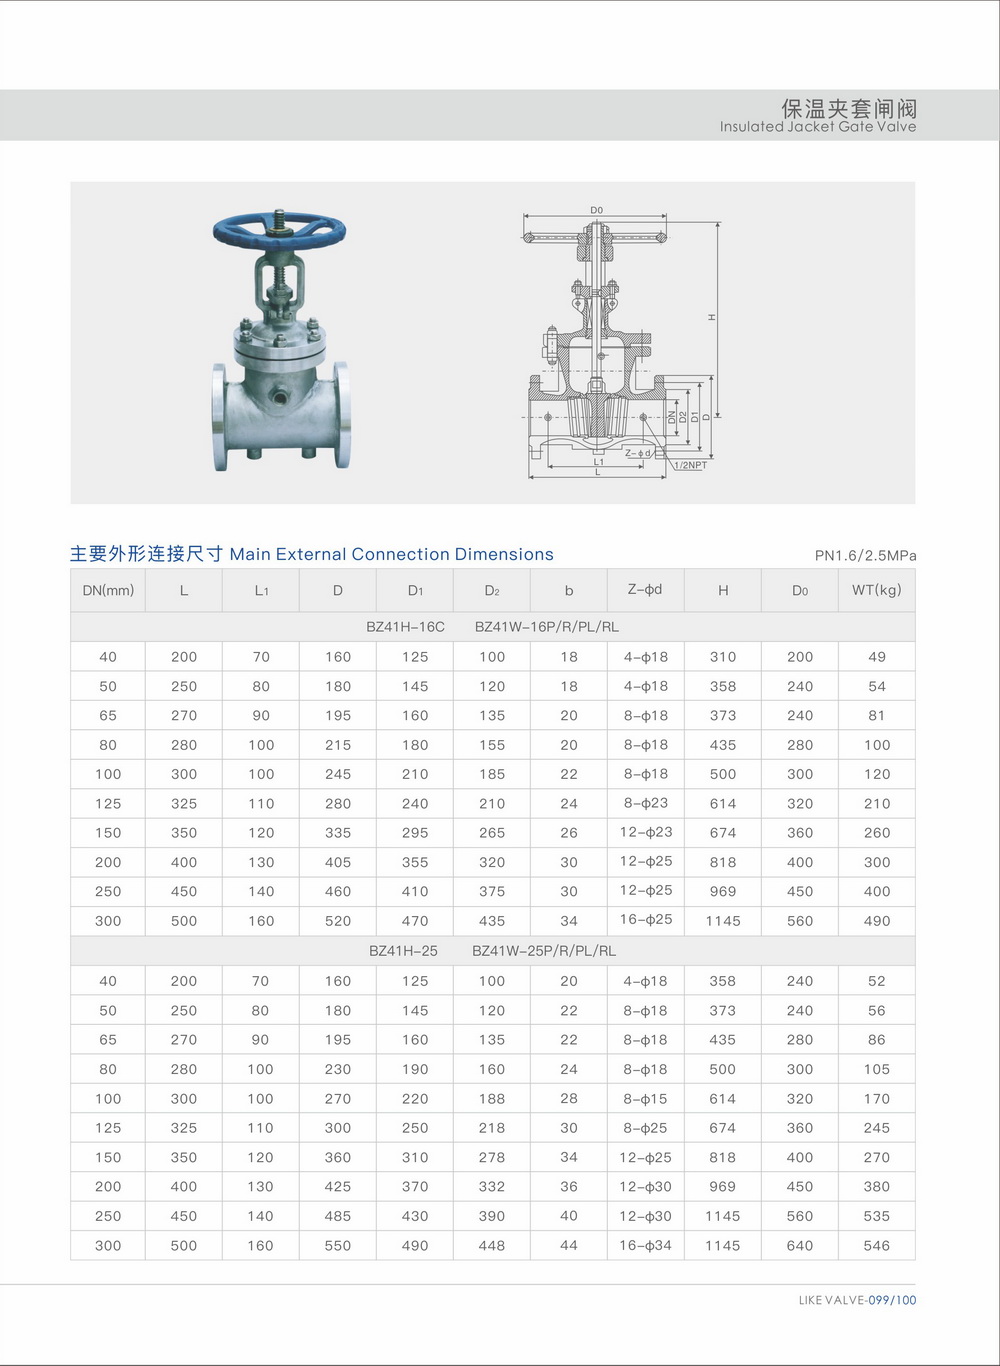 Chinese insulated jacket gate valve: an effective solution for industrial fluid control